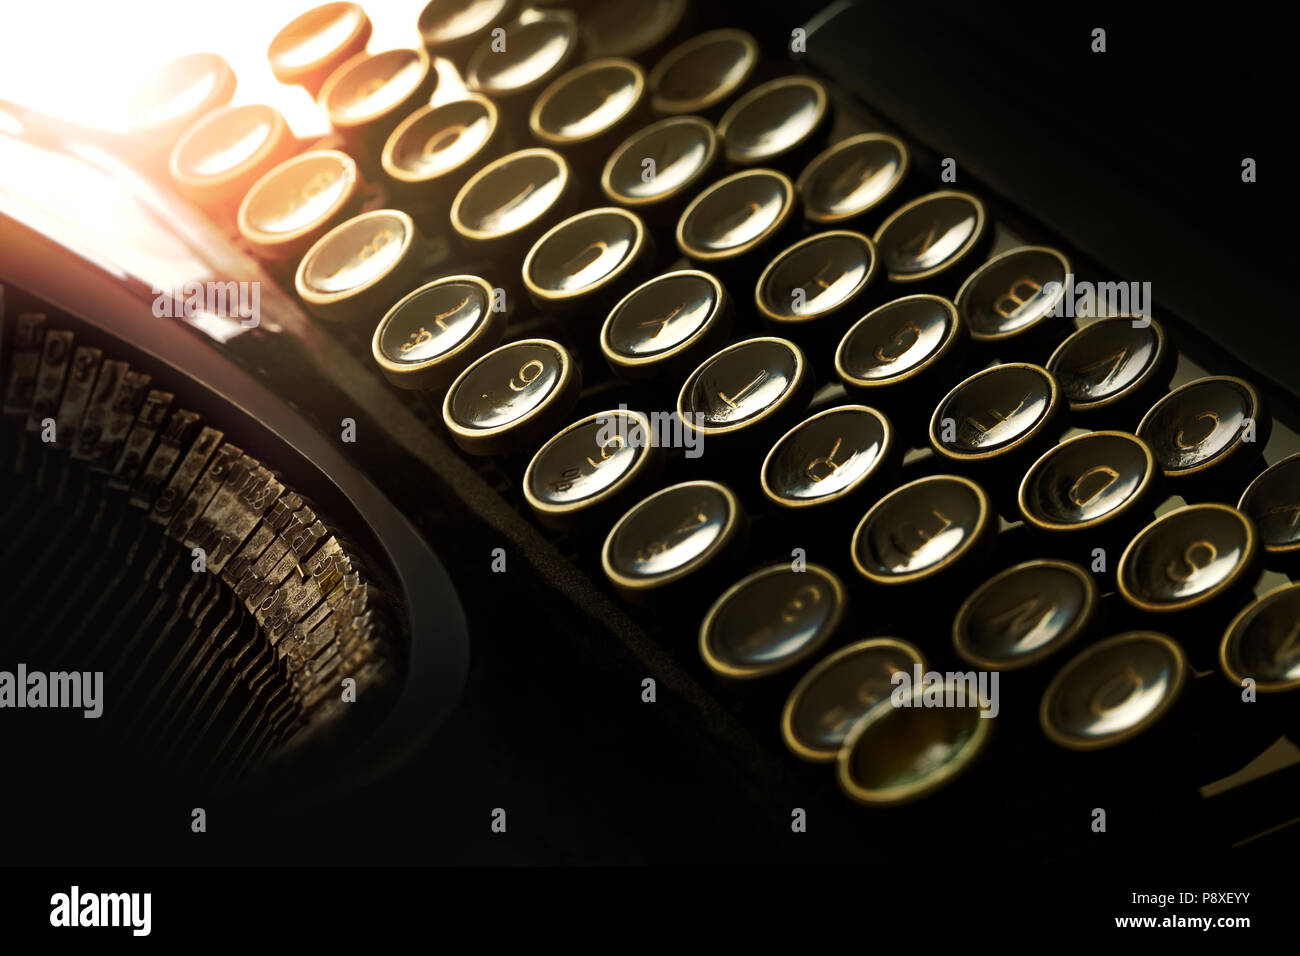 Detail of typewriter keyboard with warm toned backlight effect. Low key tone ambiance. Stock Photo